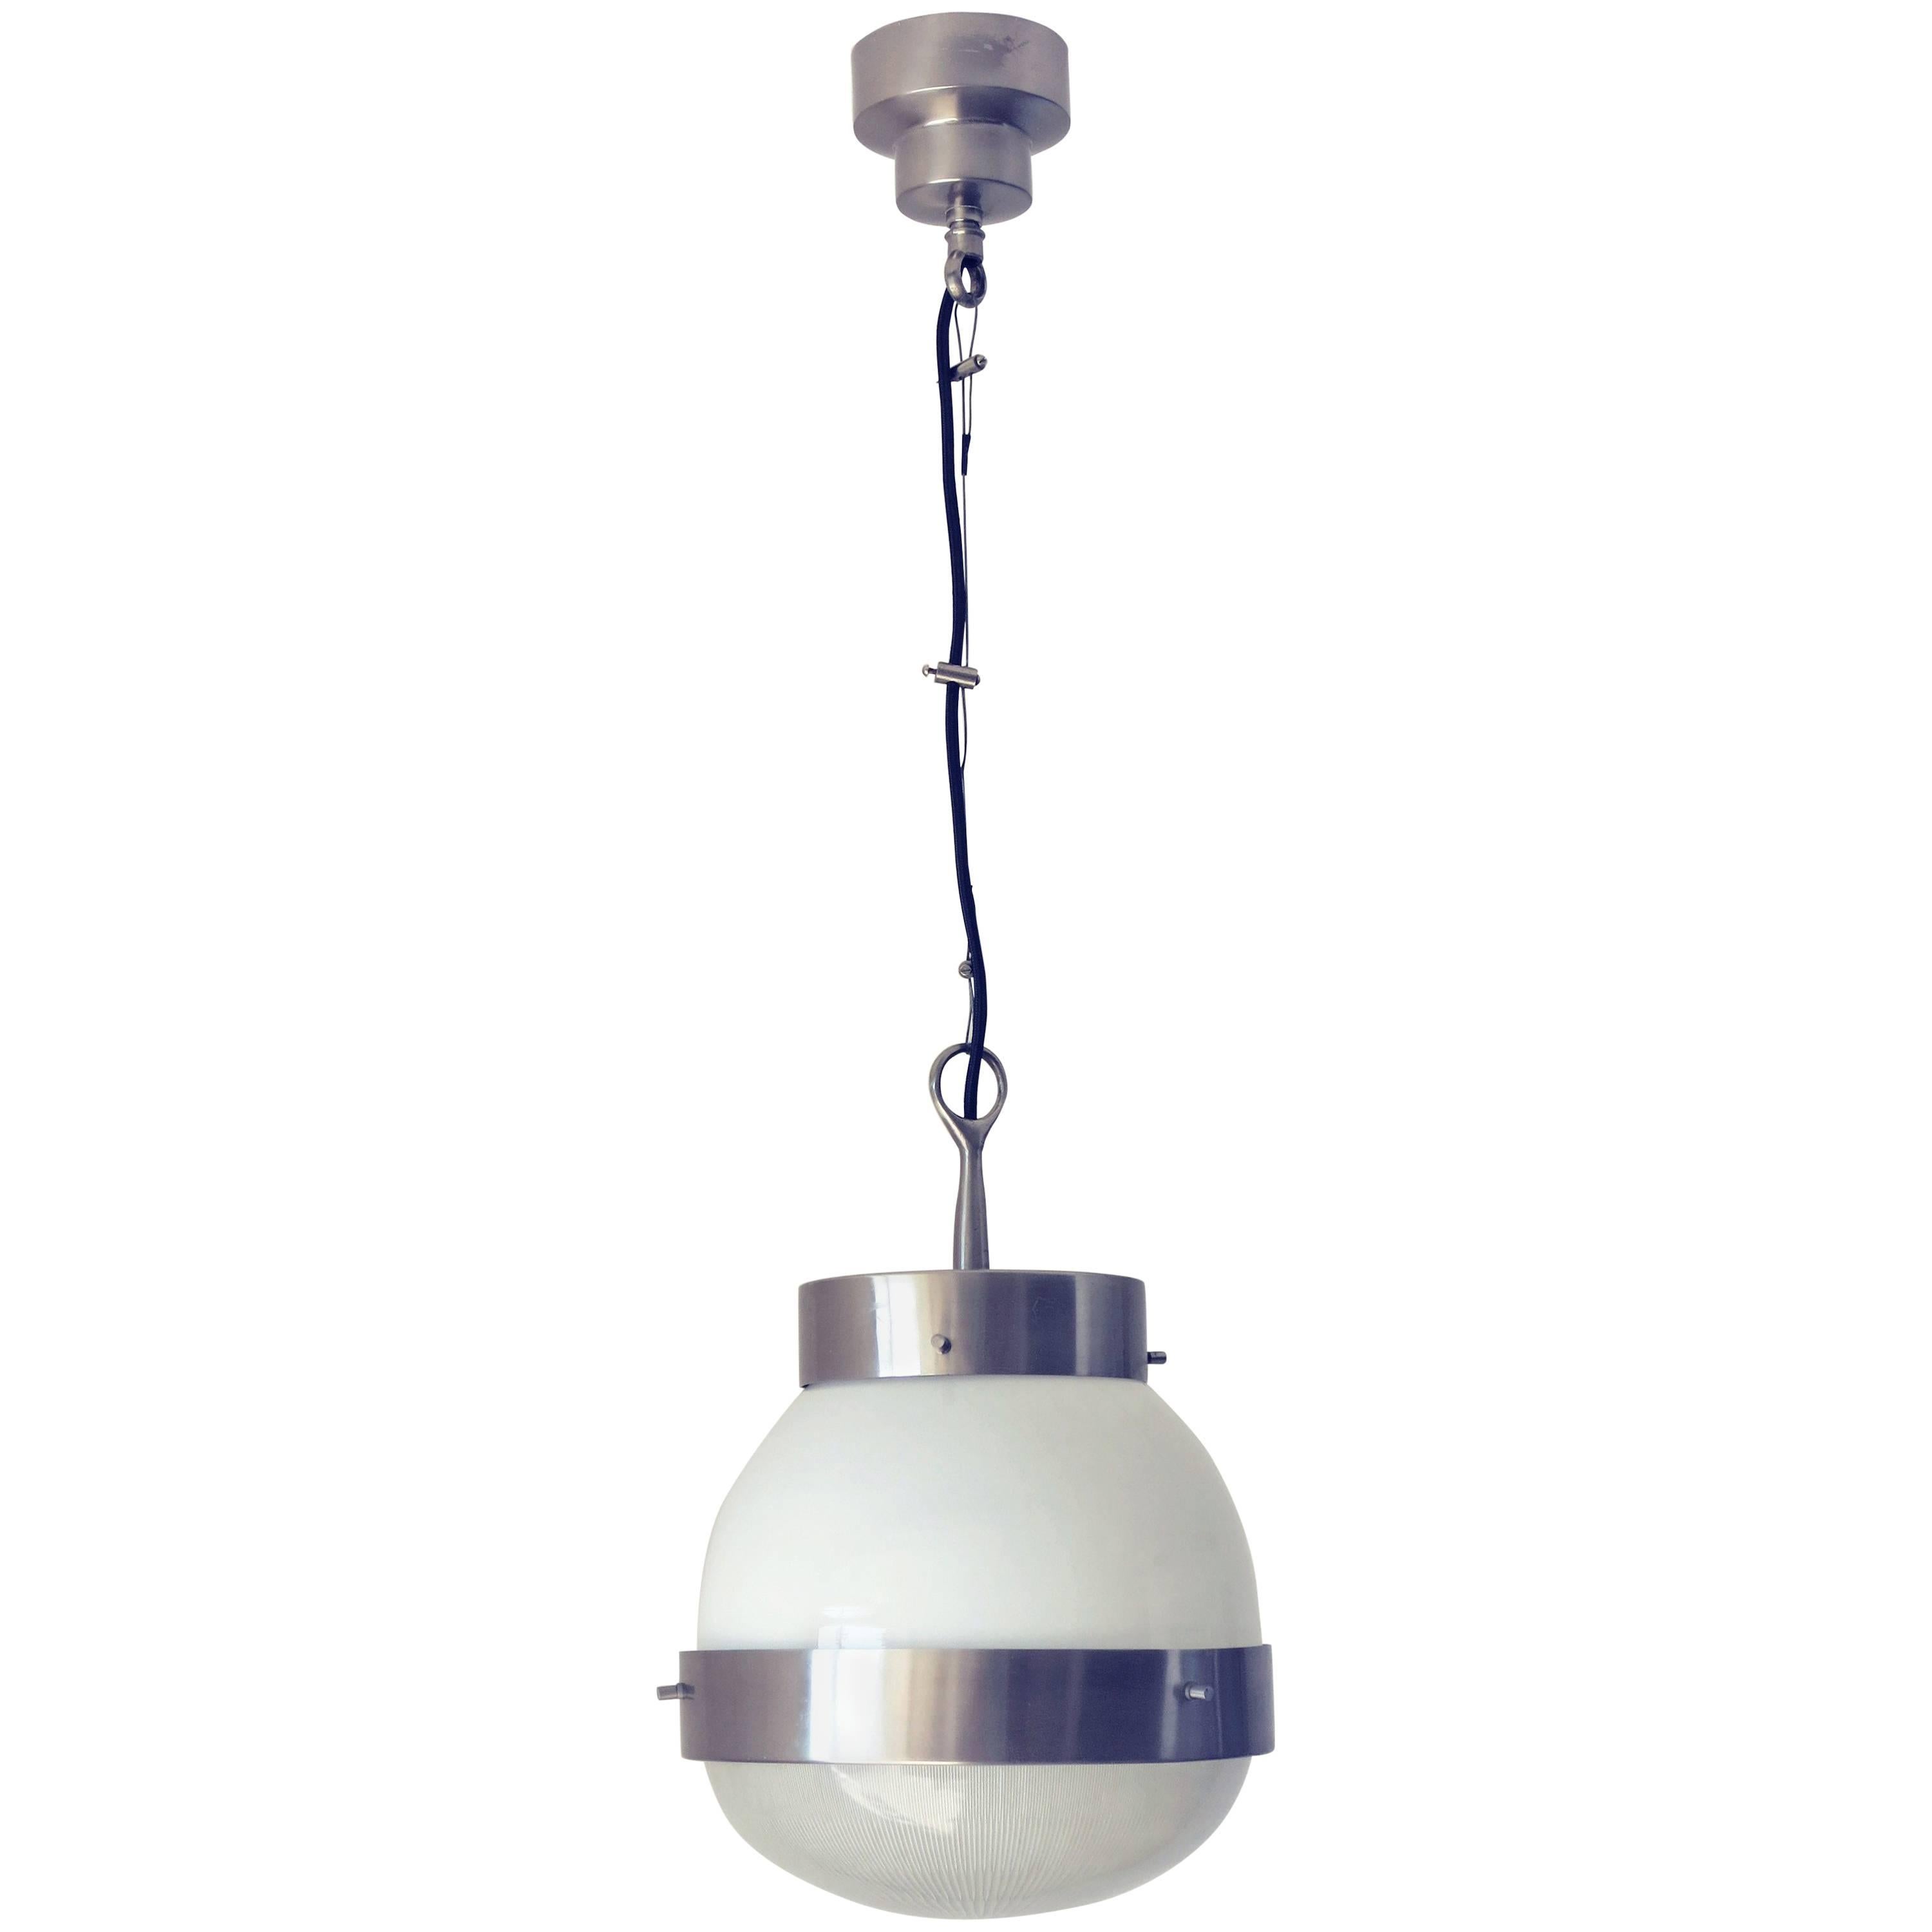 Original vintage pendant with frosted white and holophane glass on nickel frame / Designed by Sergio Mazza for Artemide / Made in Italy circa 1960’s
1 light / E26 or E27 type / max 60W each
Diameter: 12 inches / Height: 15.75 plus chain and canopy
1